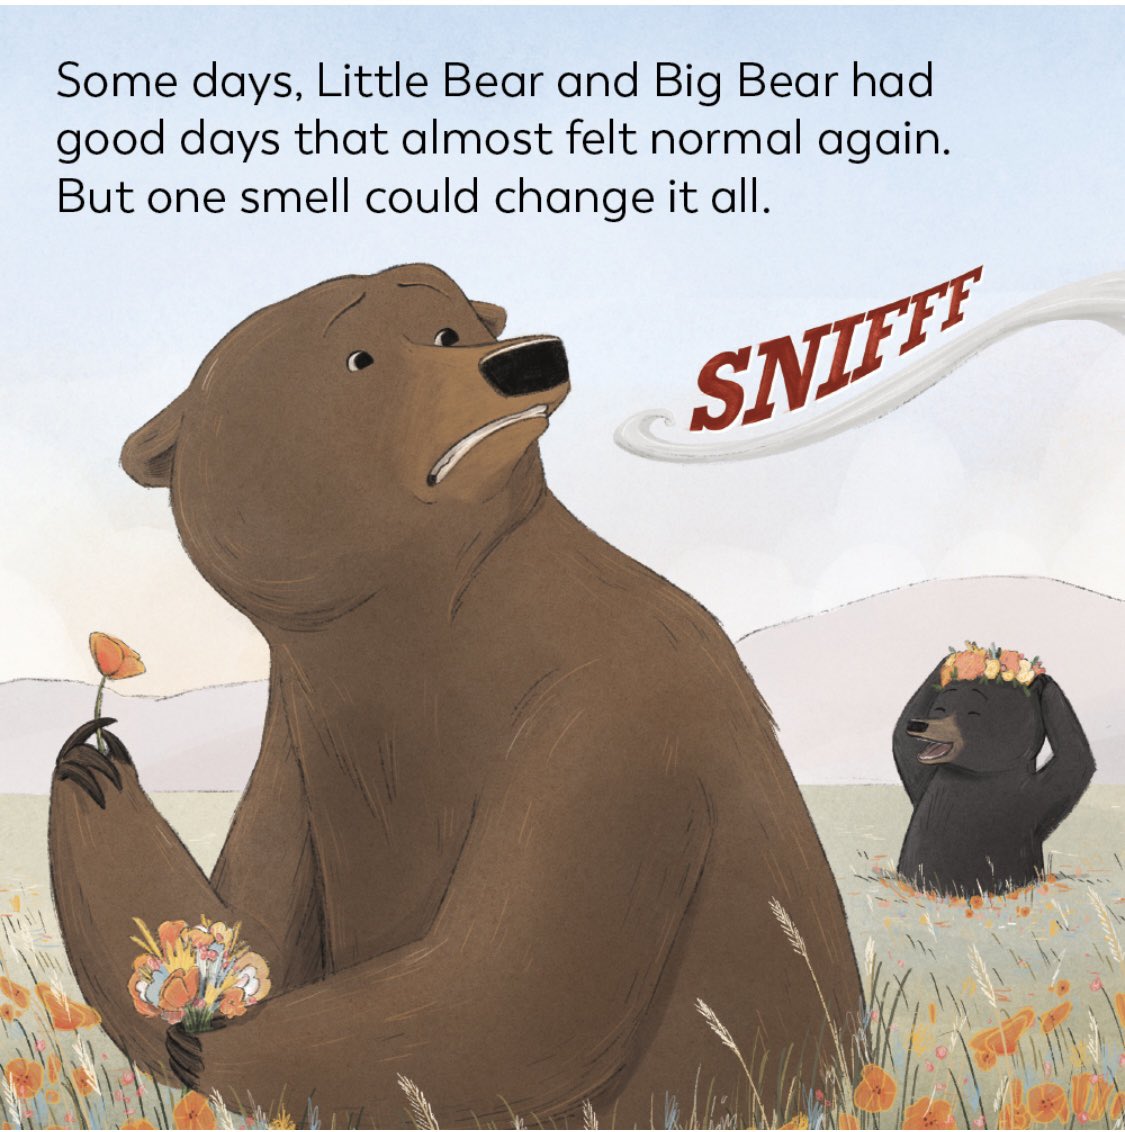 If a loved one experiences a traumatic event, books can be a gentle way to talk about trauma and PTSD. Book Big Bear Was Not The Same “An accessible, age-appropriate primer that sheds light on trauma and PTSD,” Publishers Weekly #MilitaryFamilies #FirstResponders #PTSD #Veterans